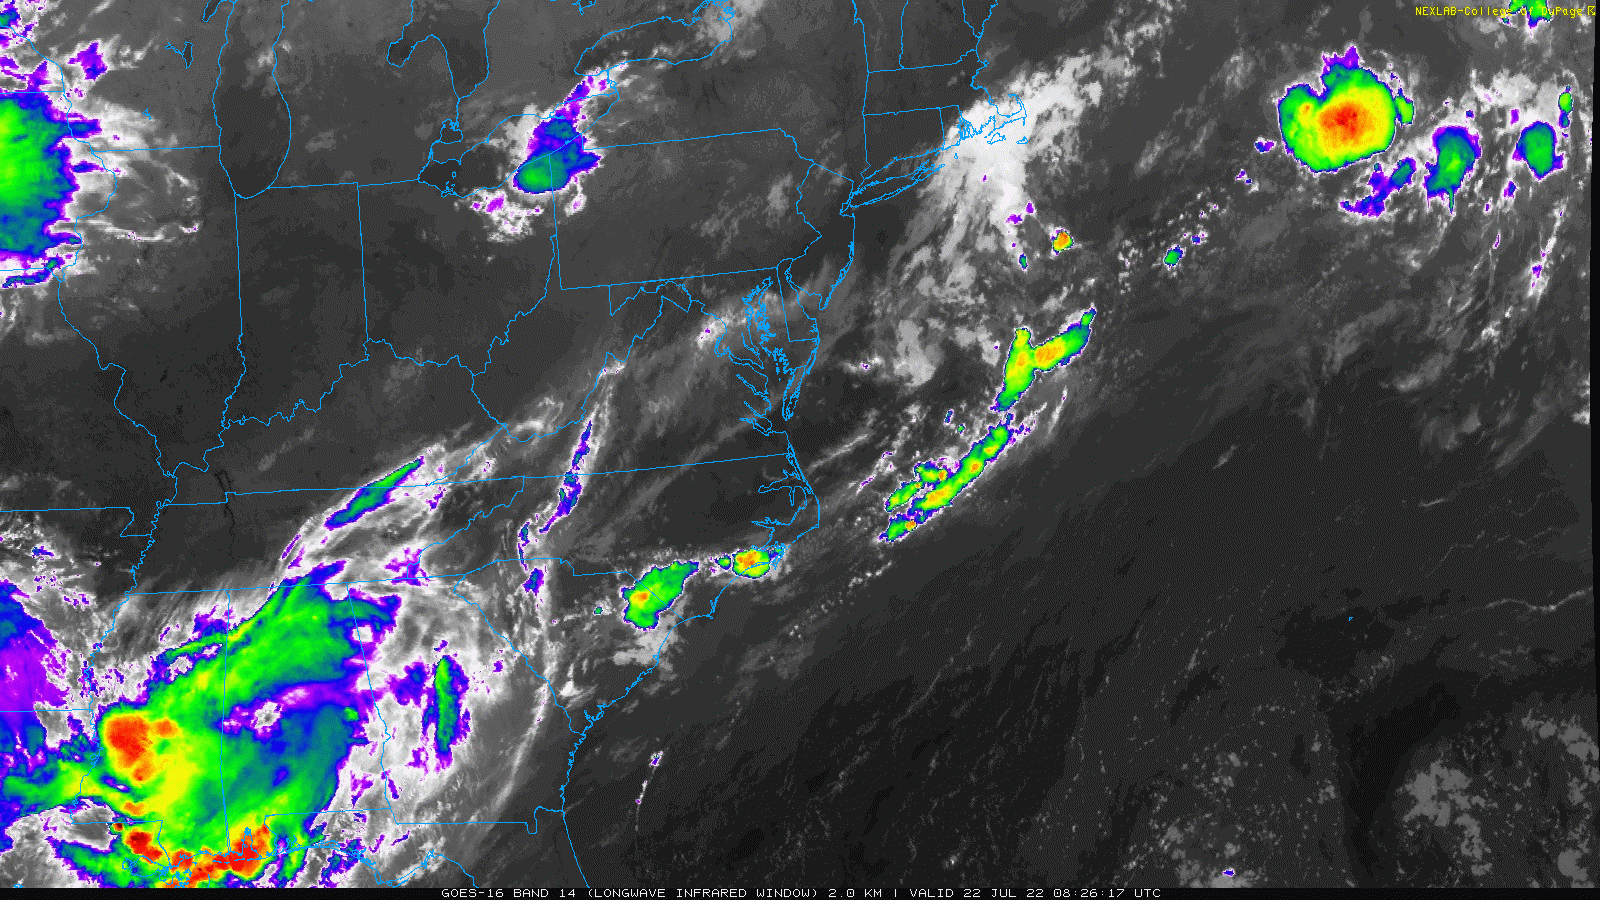 July-22-weather-satellite-clouds-friday-morning